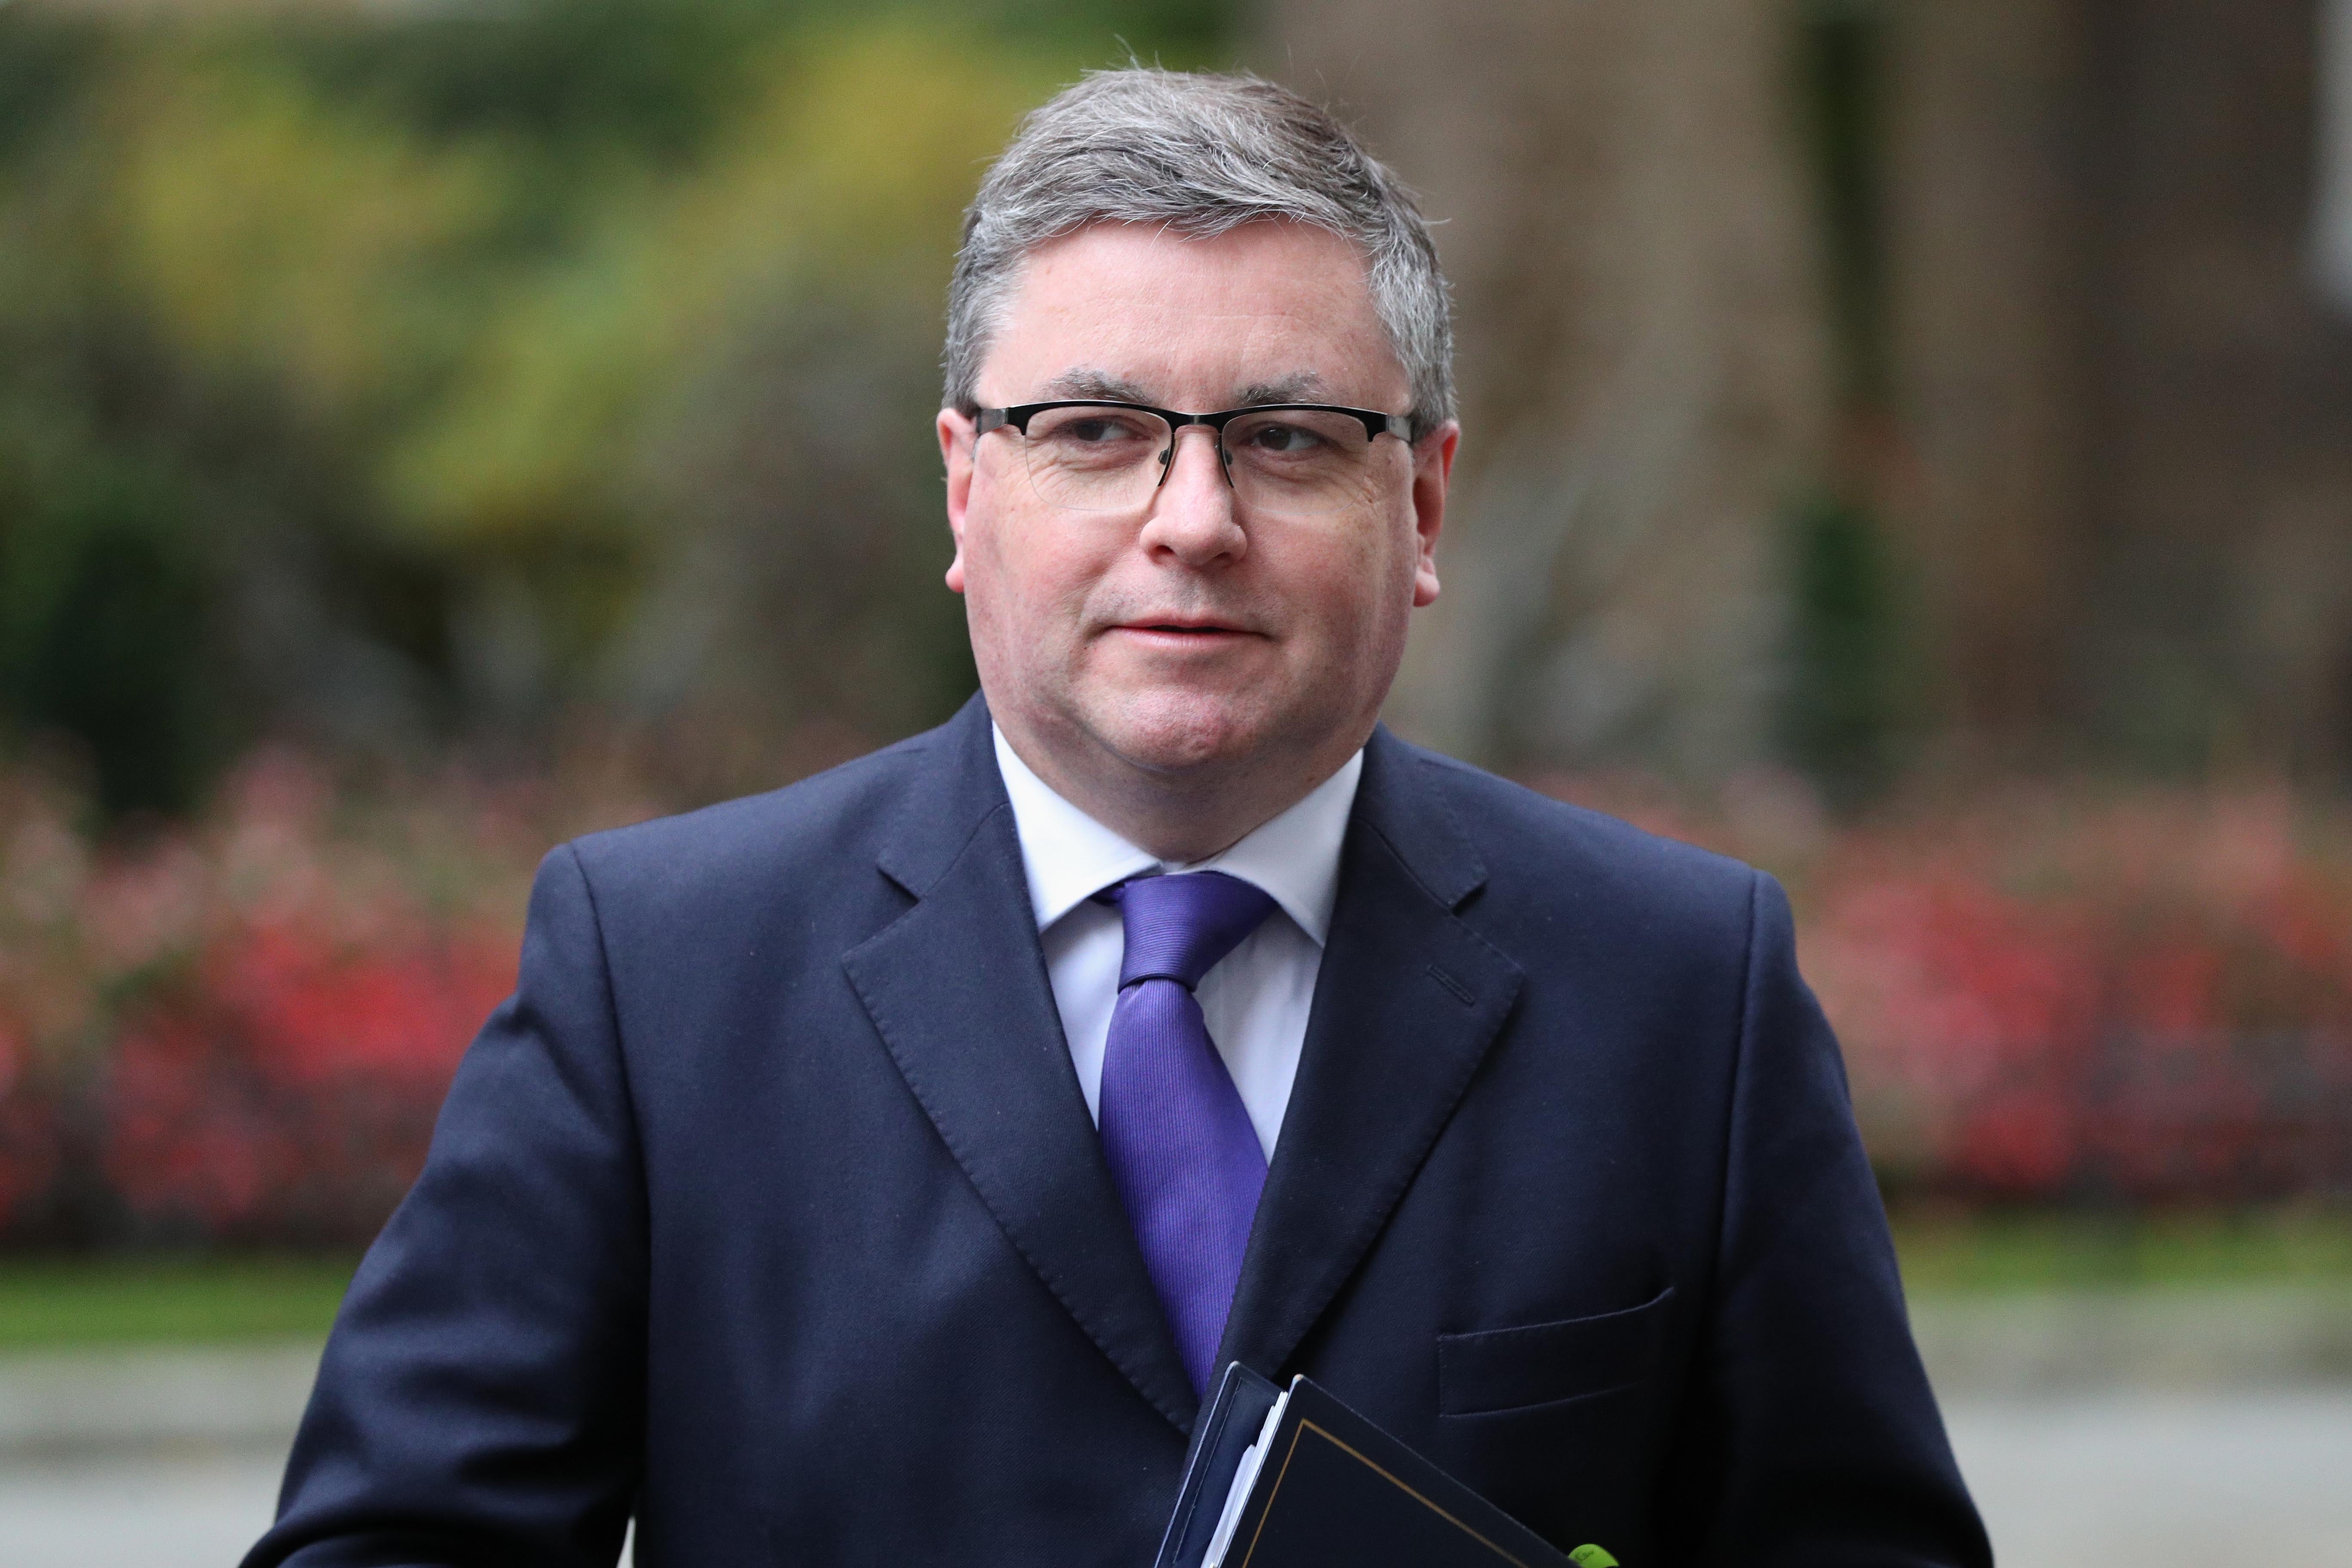 Labour has demanded that Robert Buckland must resign as Justice Secretary if he cannot reverse the plunging prosecution and conviction levels